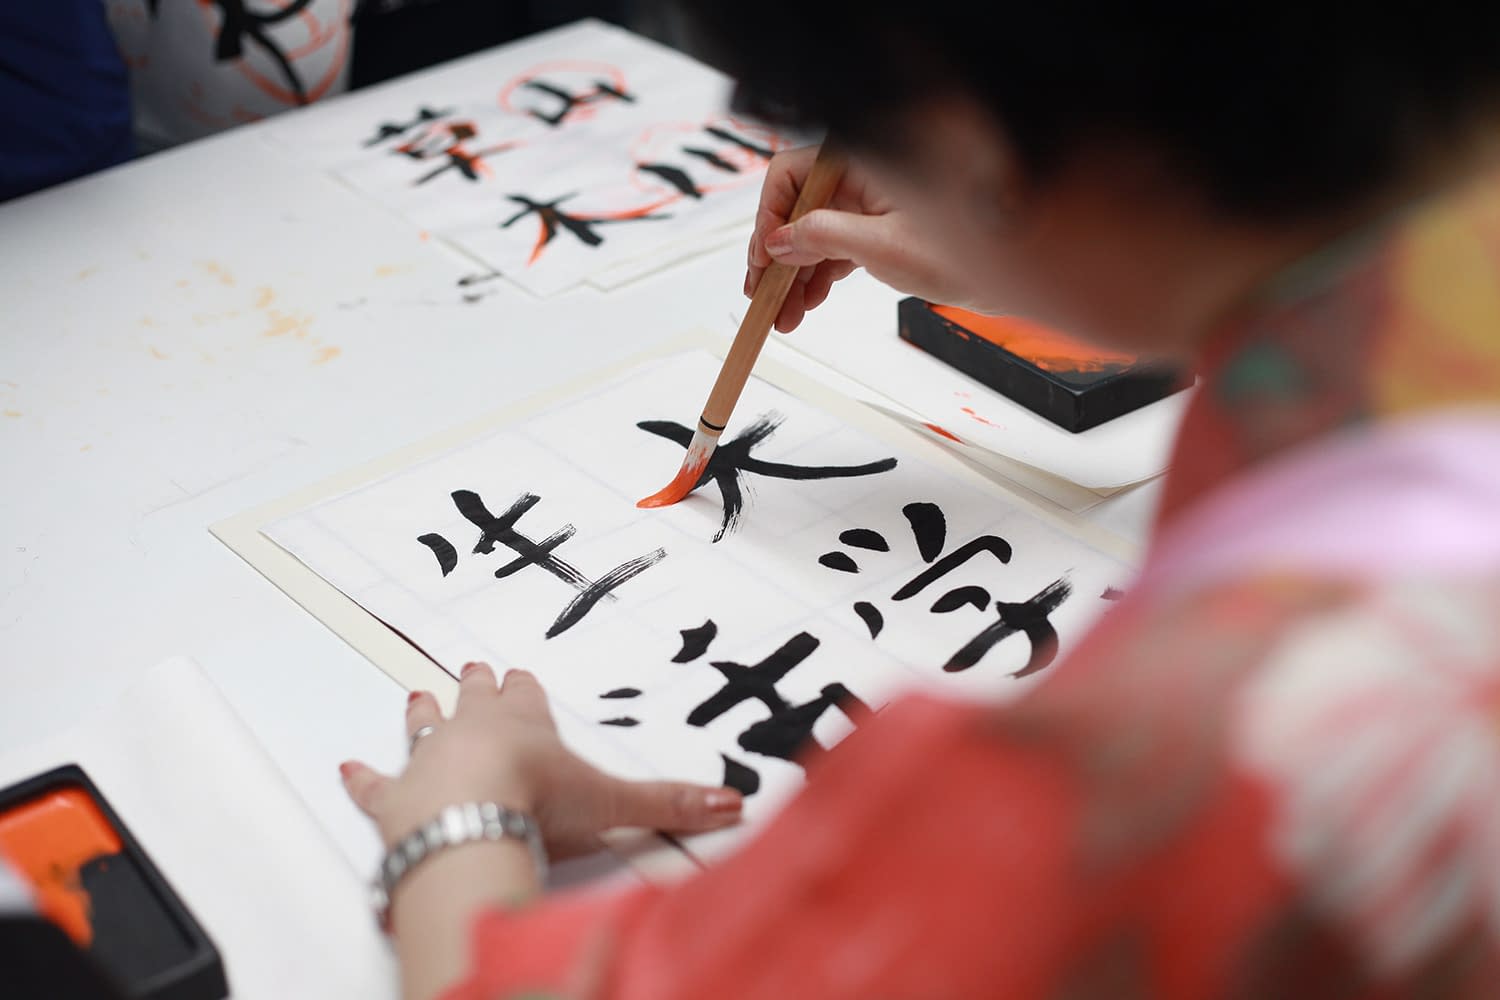 Lady performing Japanese calligraphy